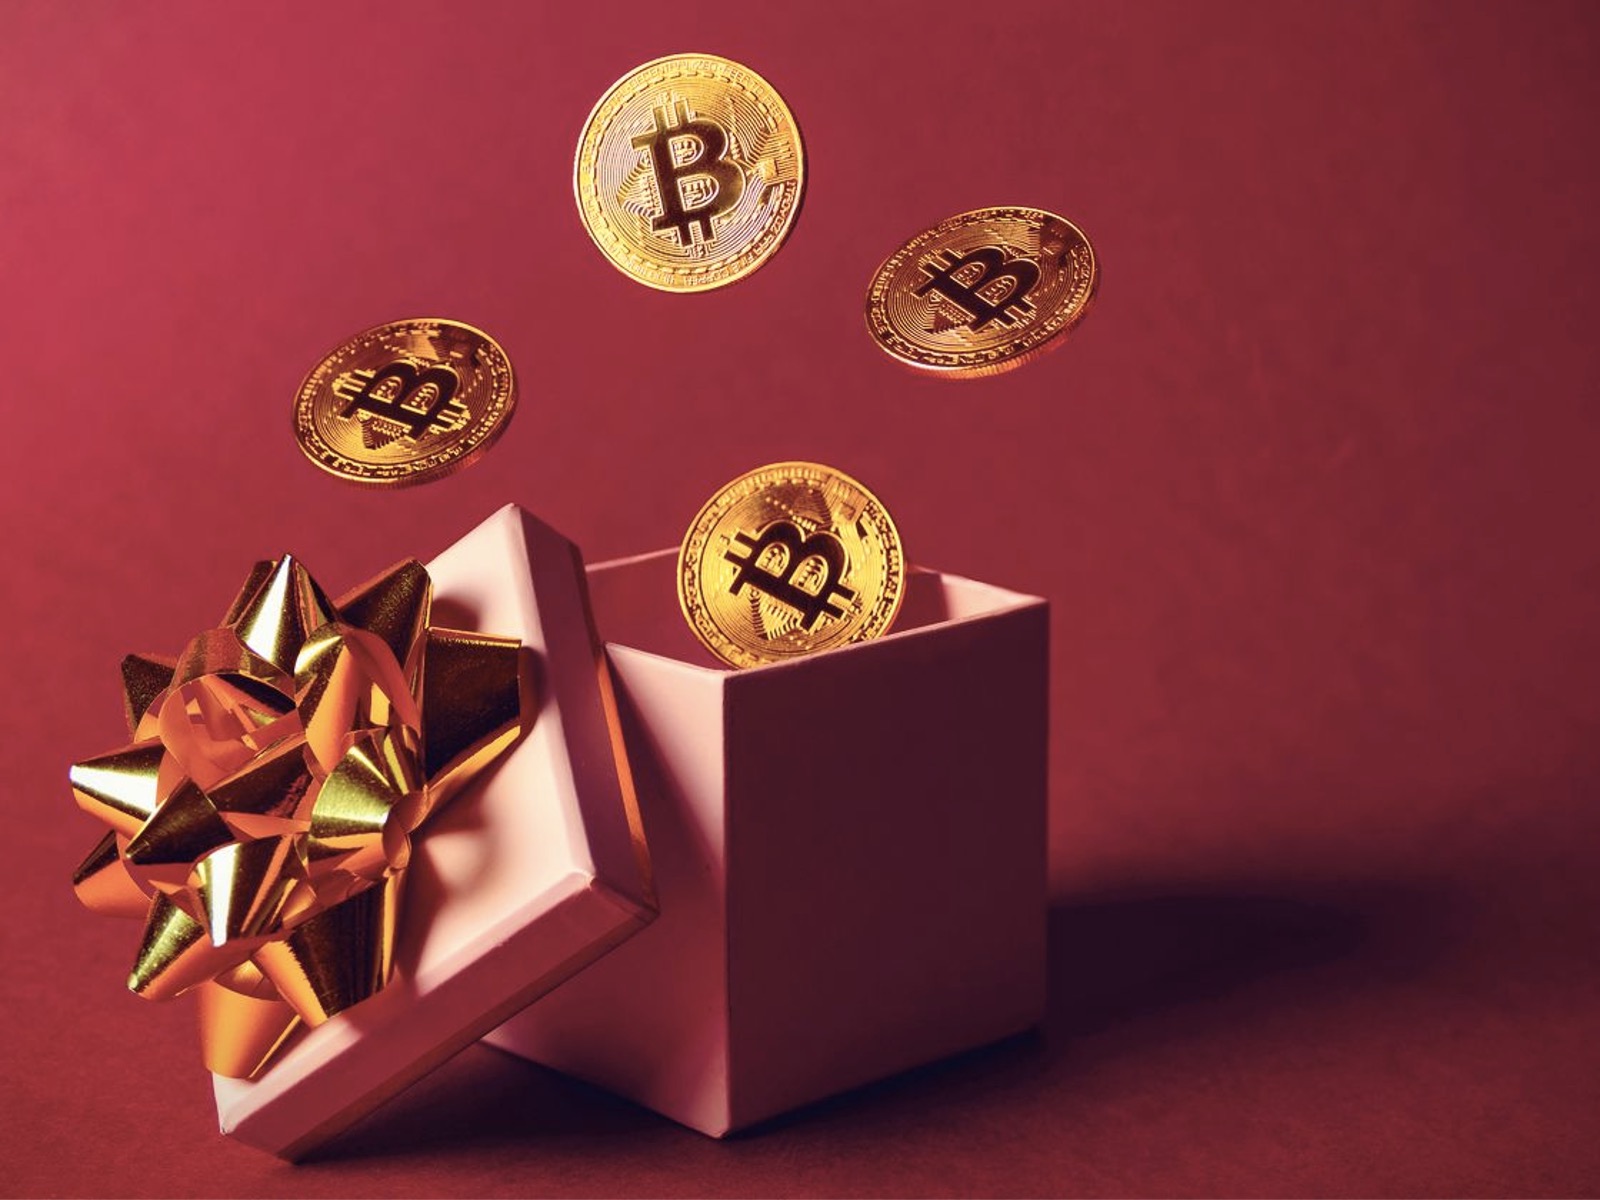 Arizona State University Receives First Cryptocurrency Gift